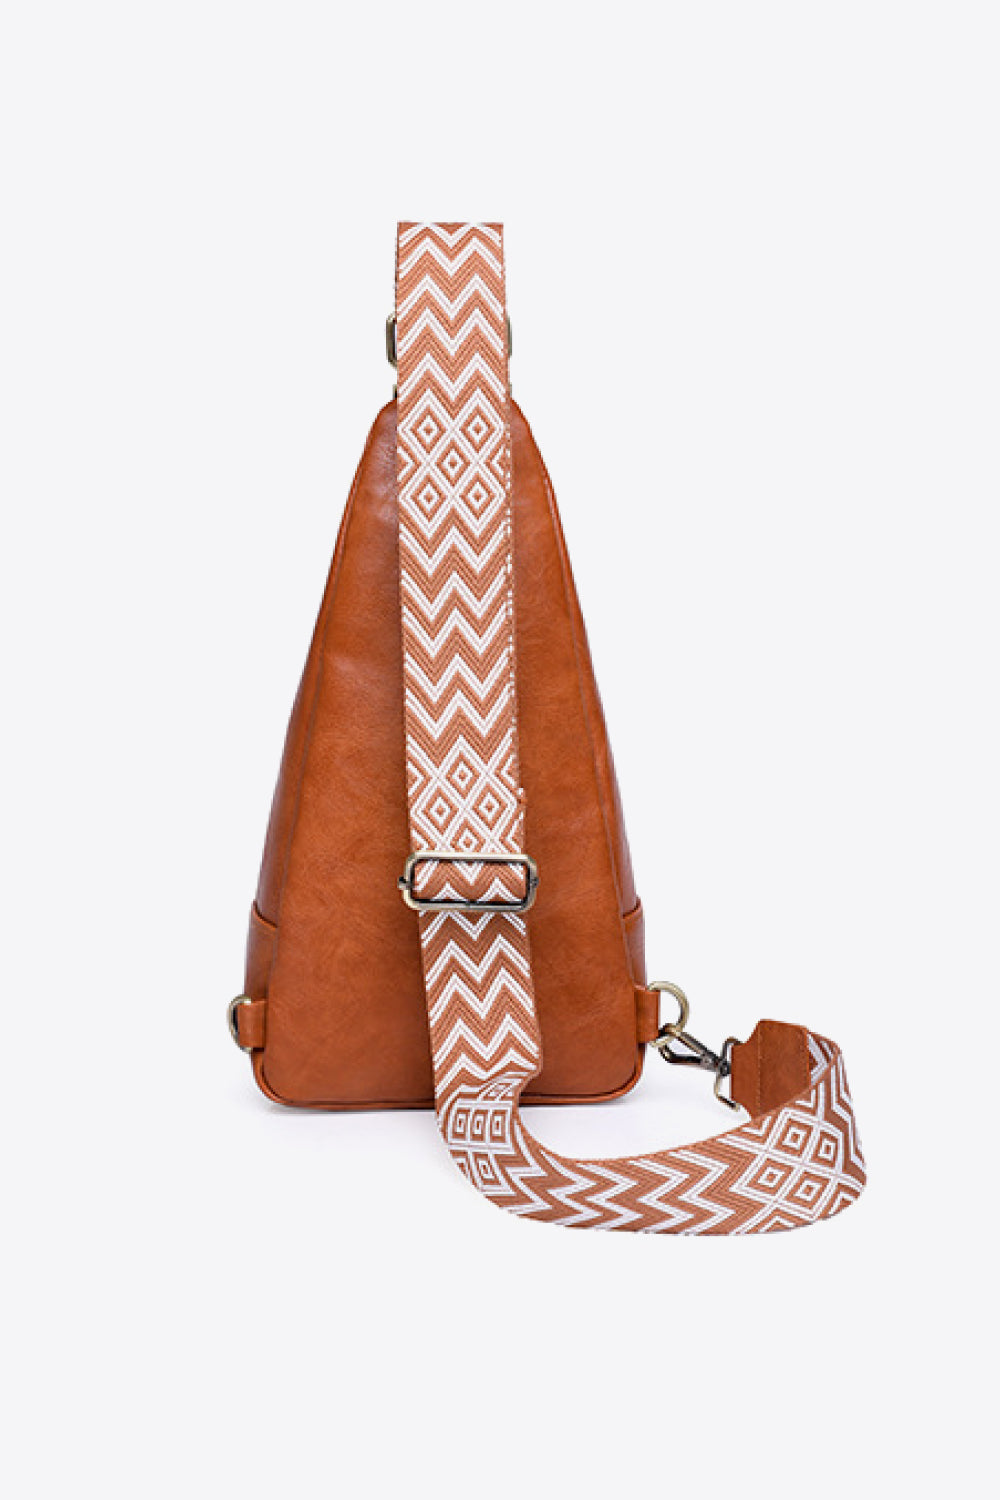 Printed PU Leather Sling Bag - Chestnut / One Size